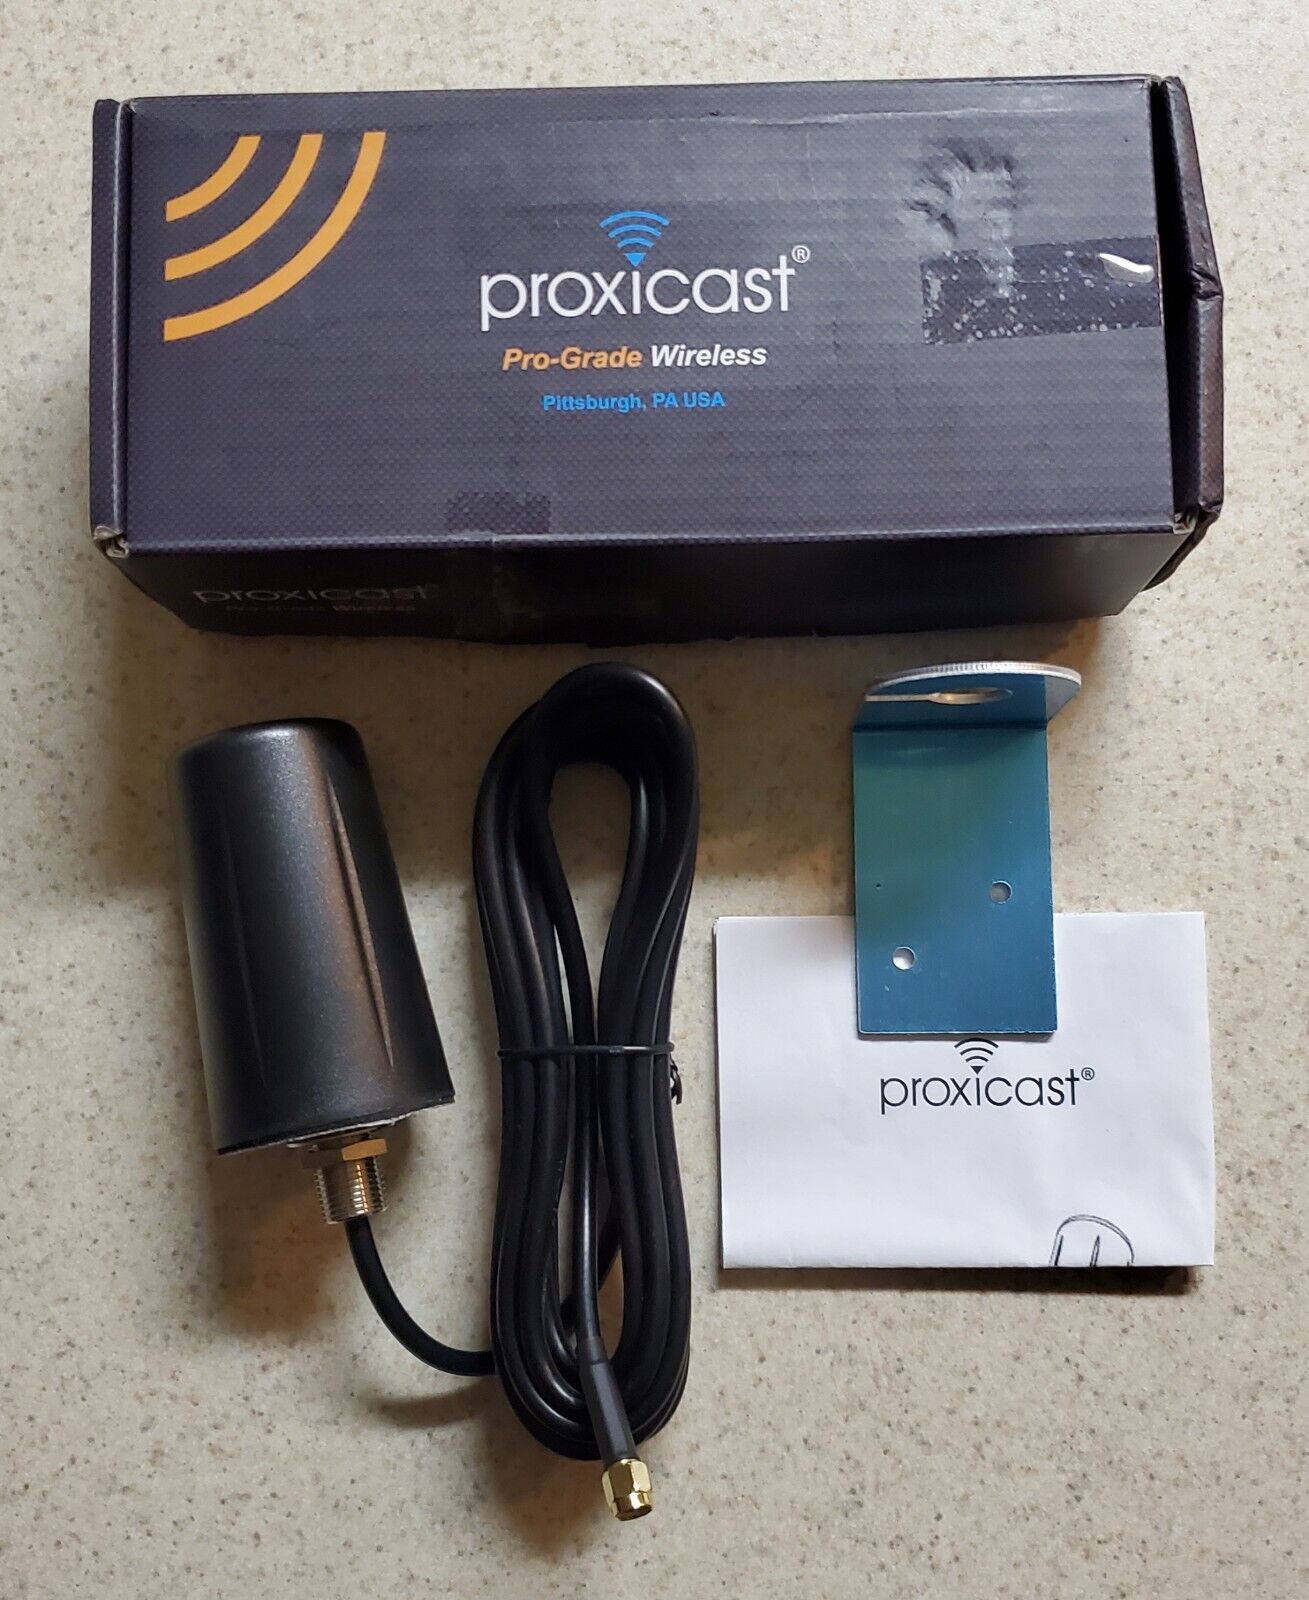 Proxicast ANT-121-002